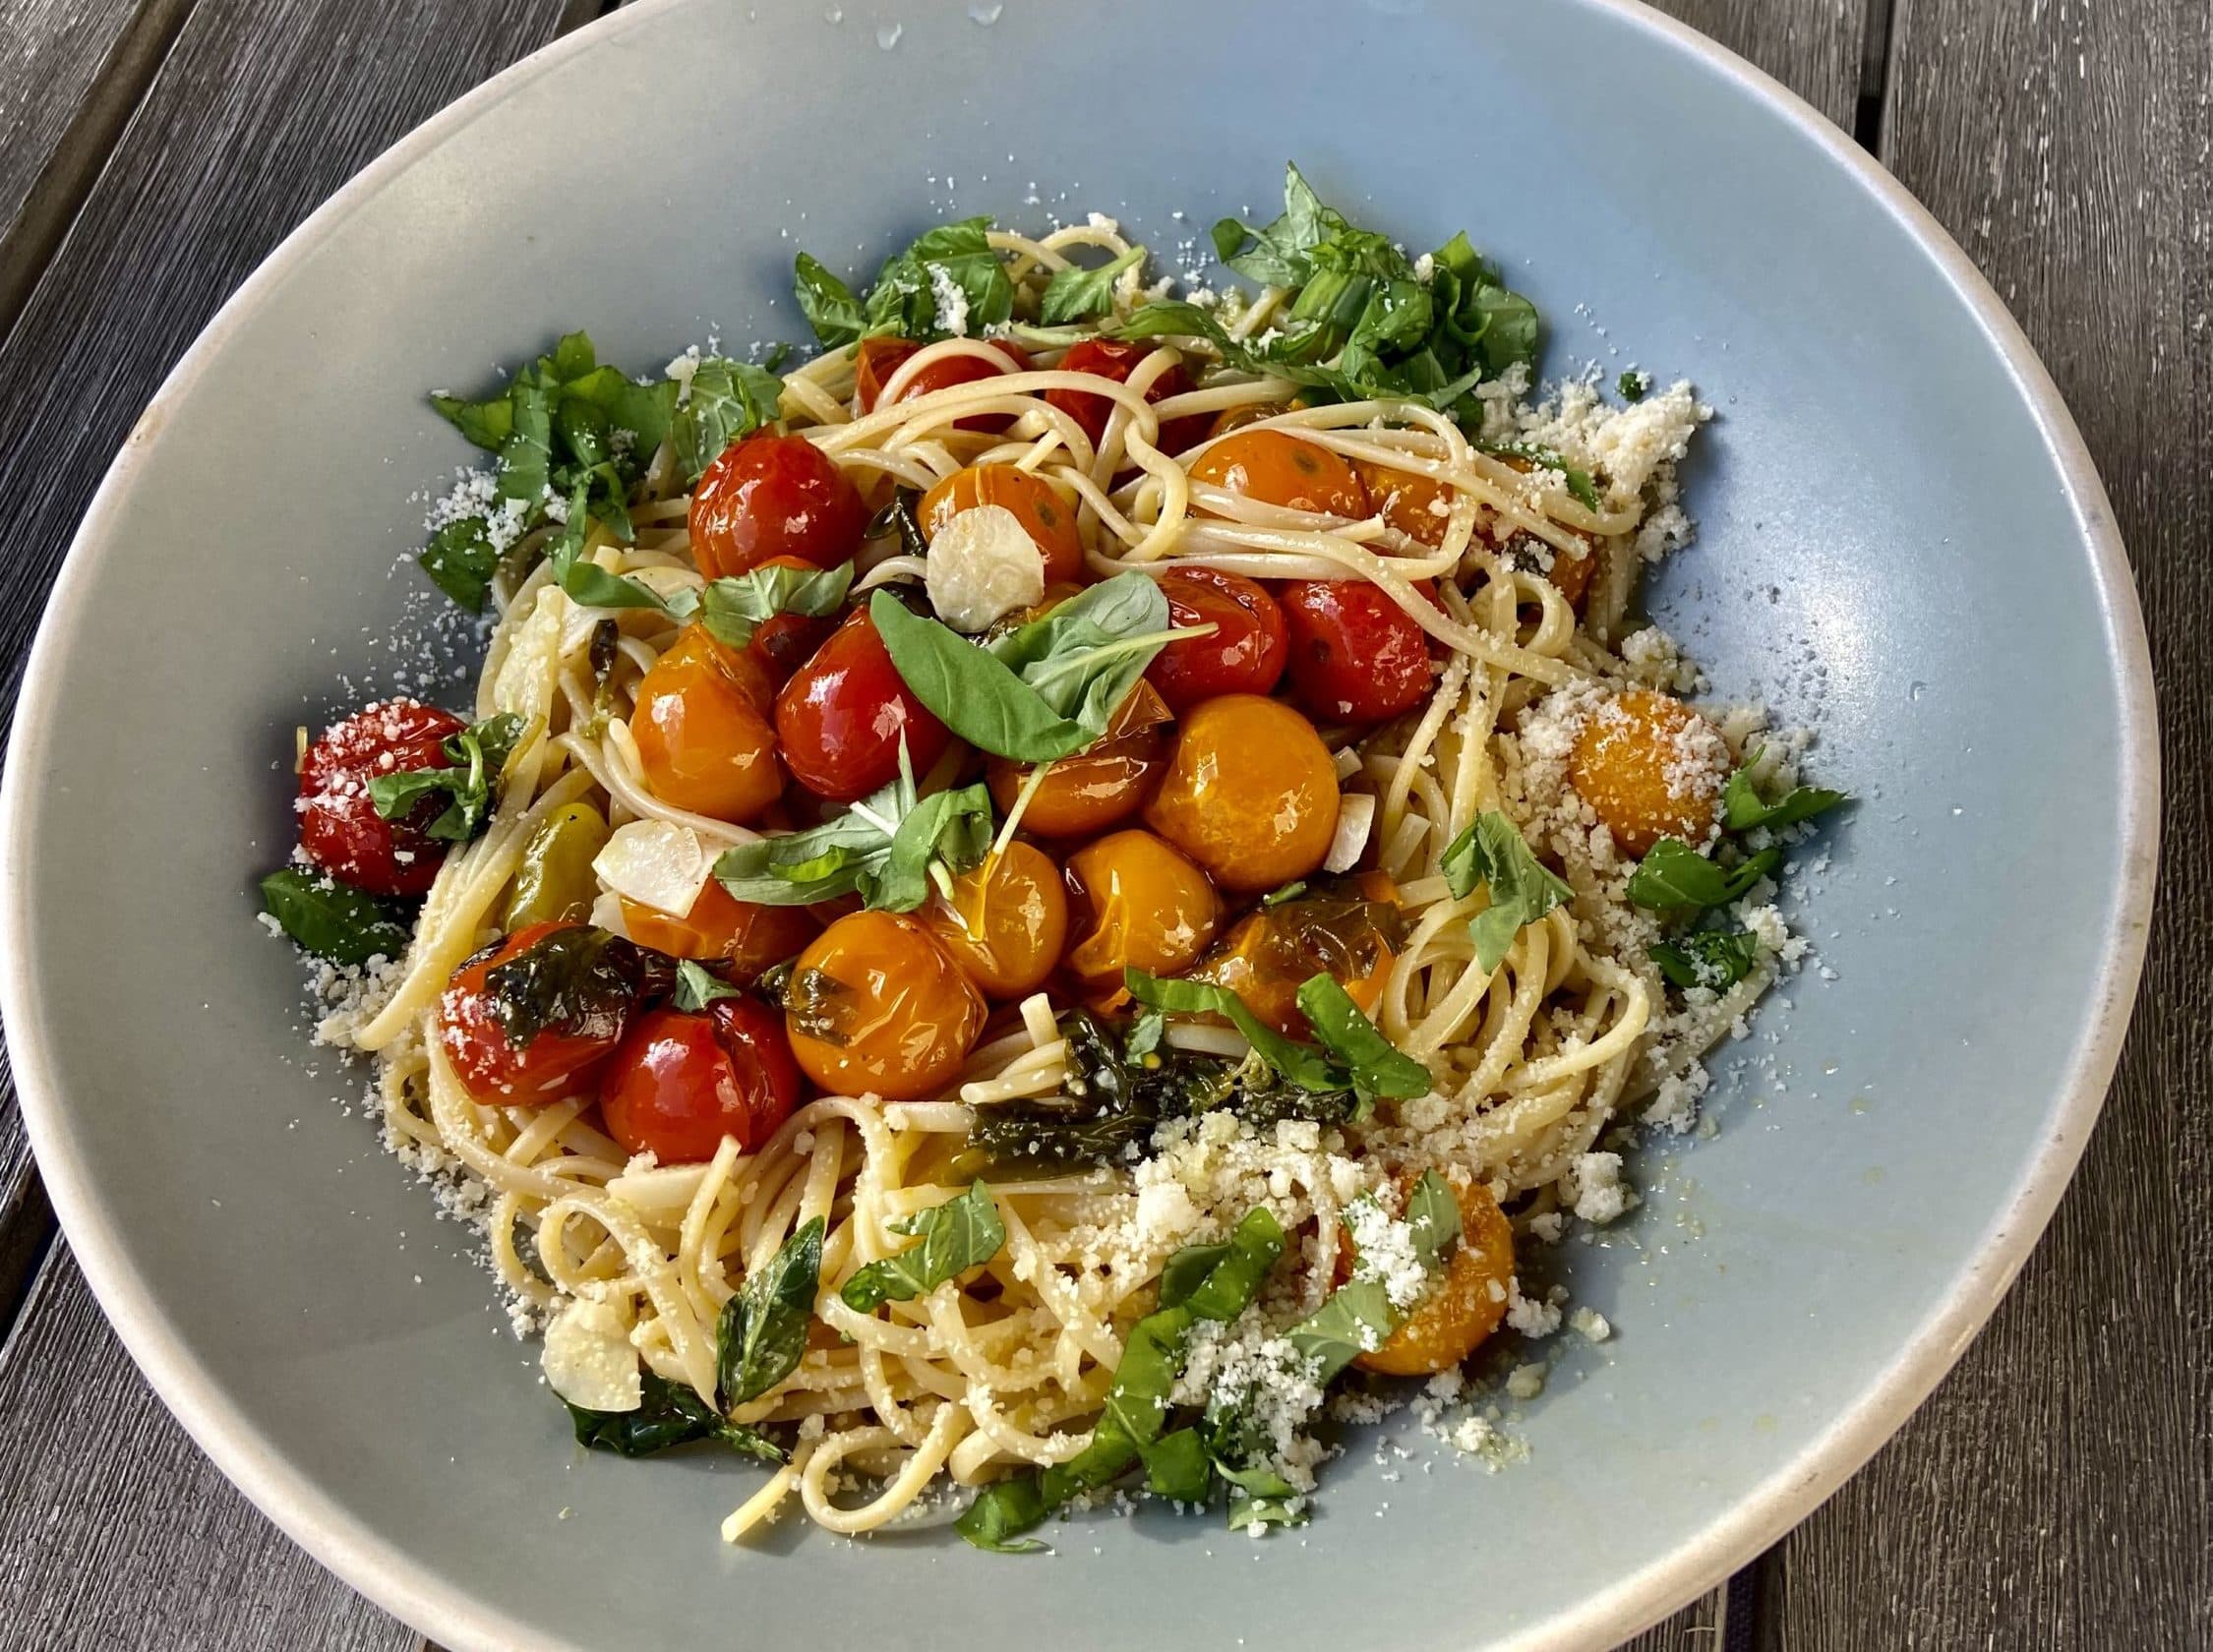 Linguine with Cherry Tomato Confit, Basil, Pine Nuts and Arugula.  (Kathy Gunst/Here and Now)